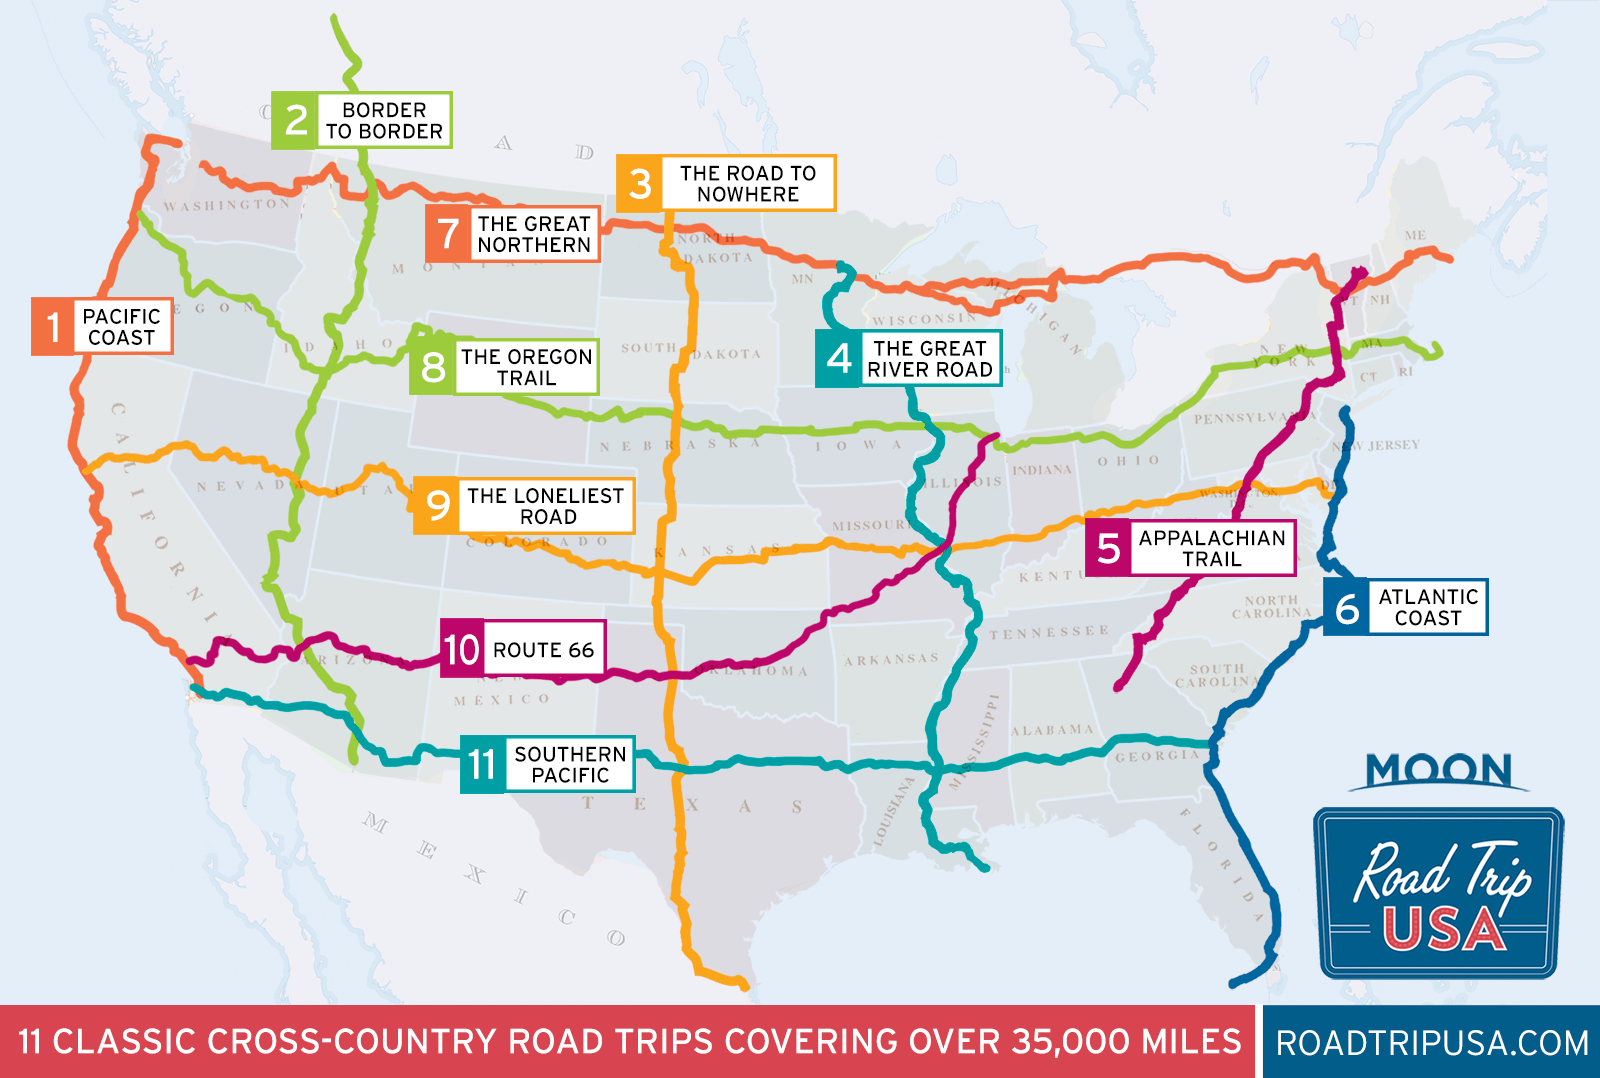 US map showing the 11 cross-country road trips on roadtripusa.com